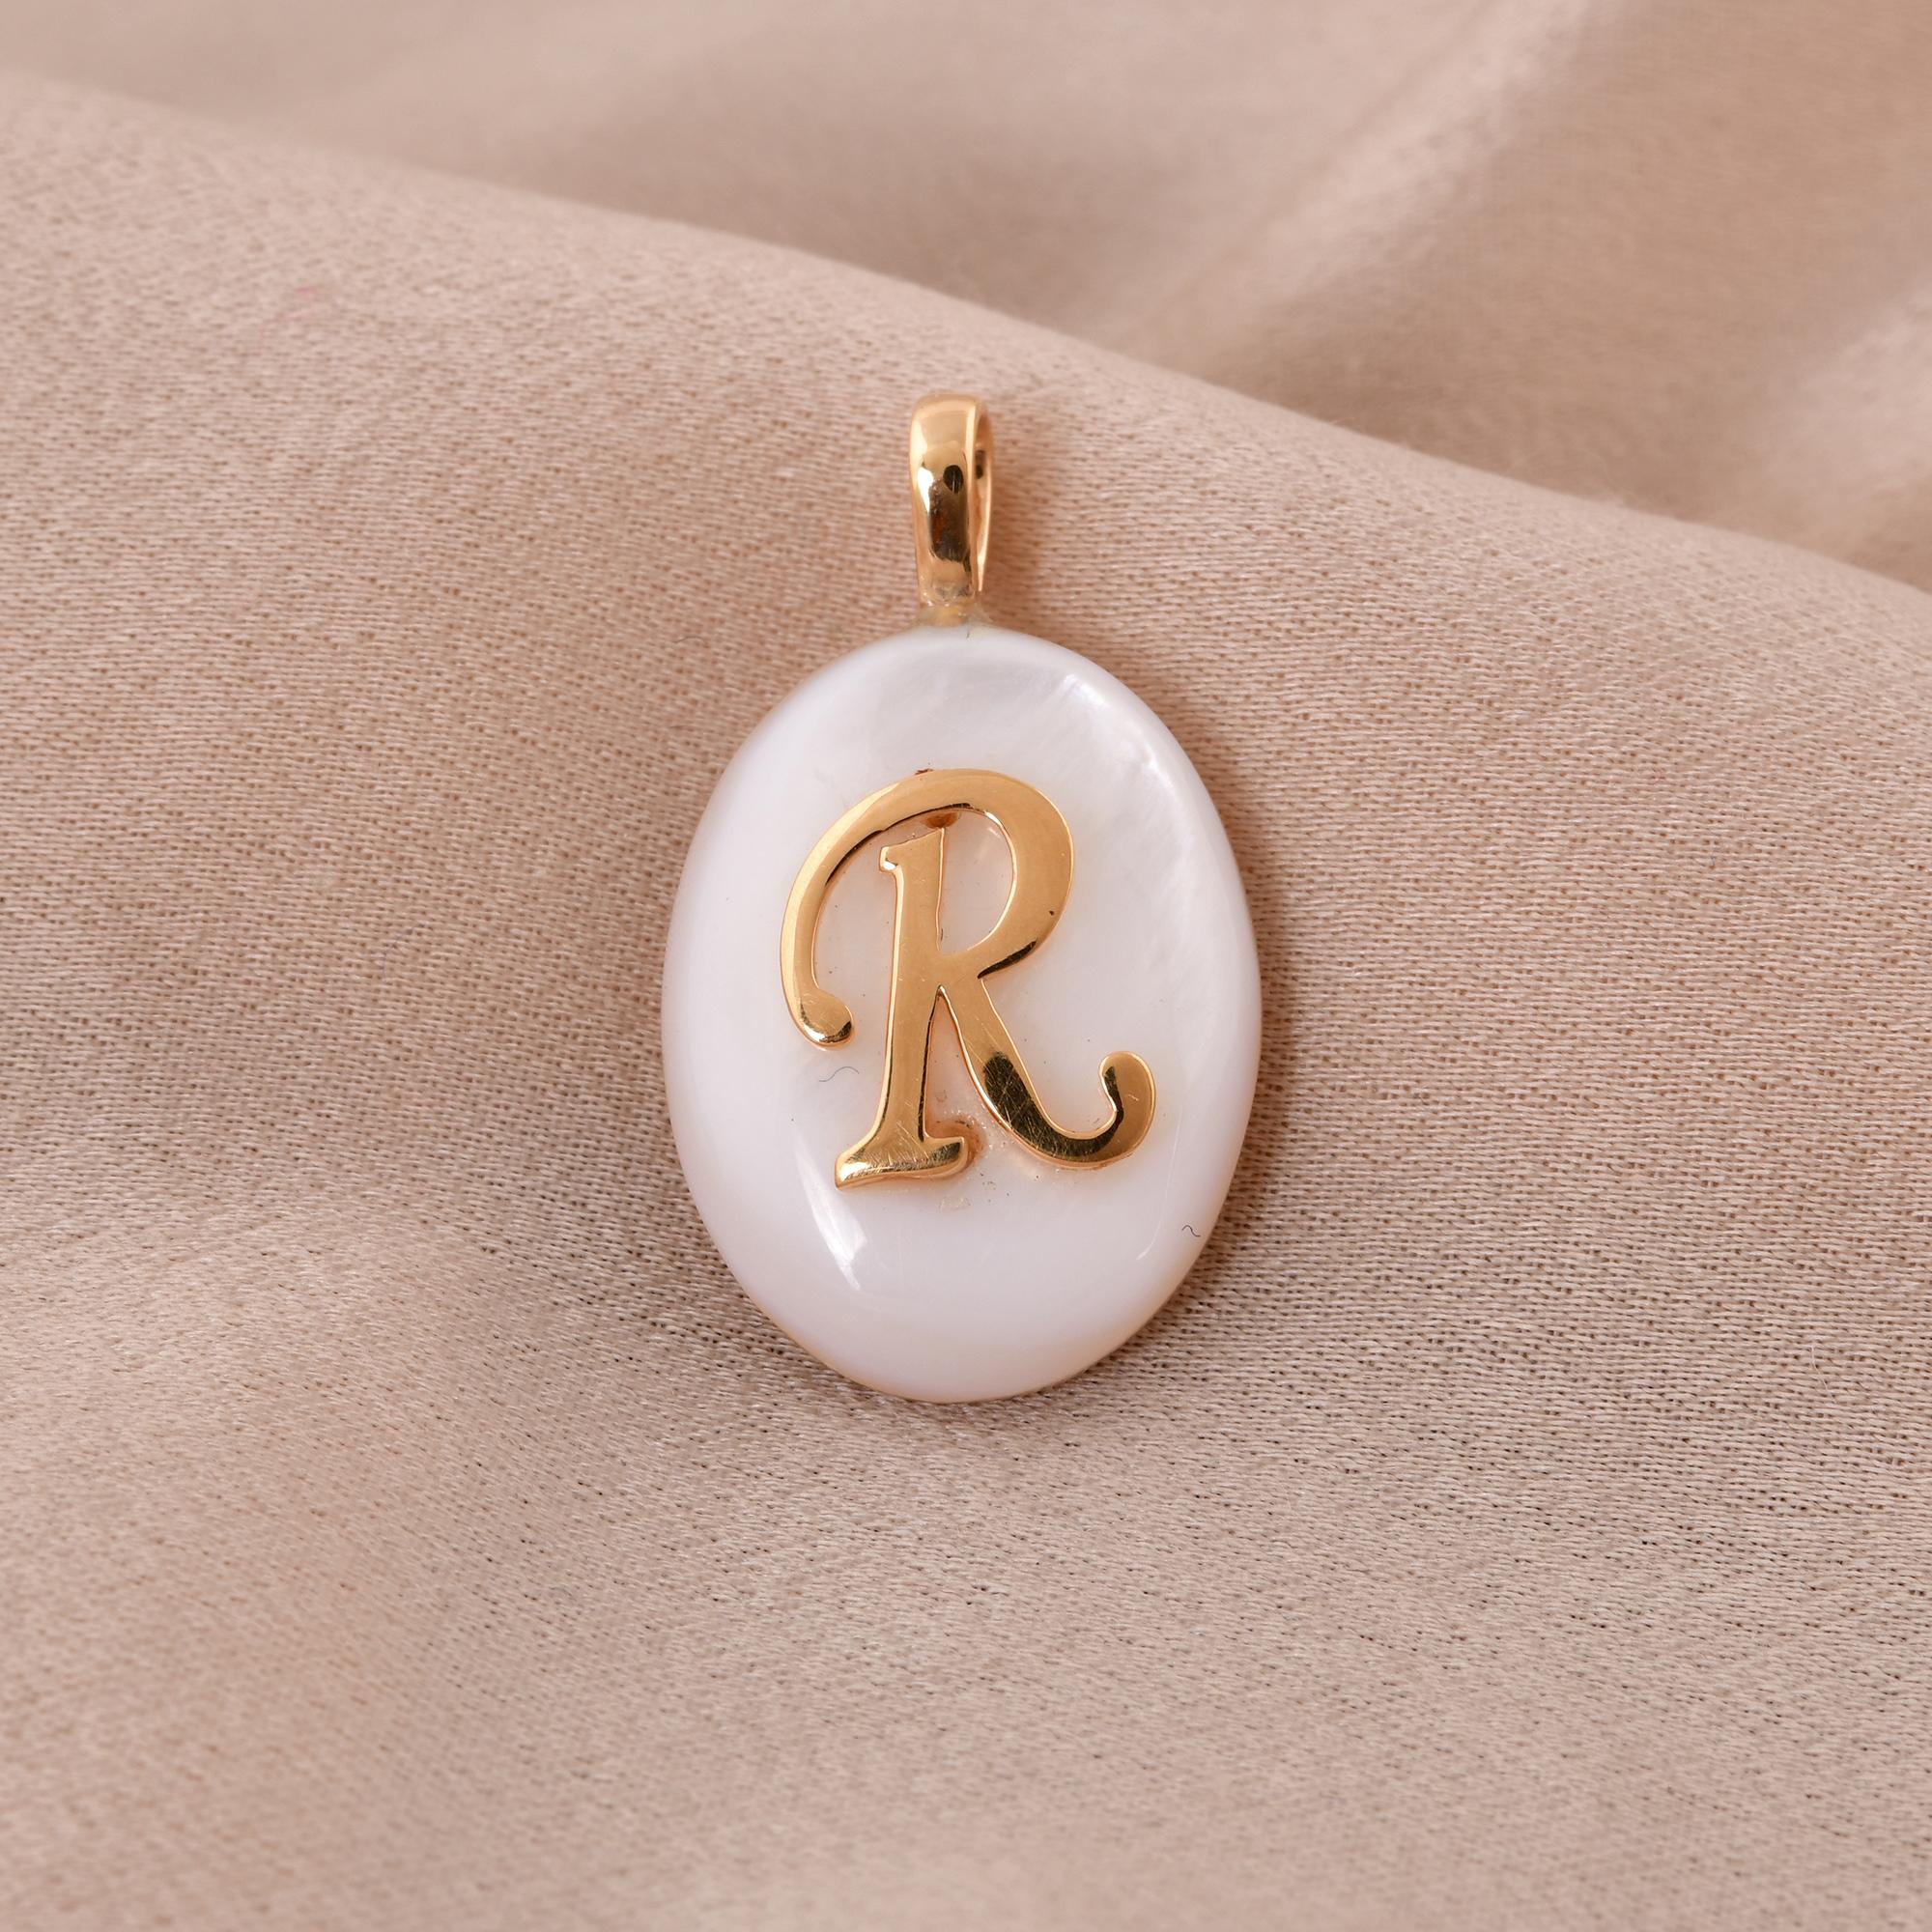 Crafted from luxurious 18 karat yellow gold, this pendant boasts a warm and radiant hue that complements the shimmering beauty of the Mother of Pearl gemstone. The rich tone of the gold adds a touch of opulence to the piece, making it a luxurious